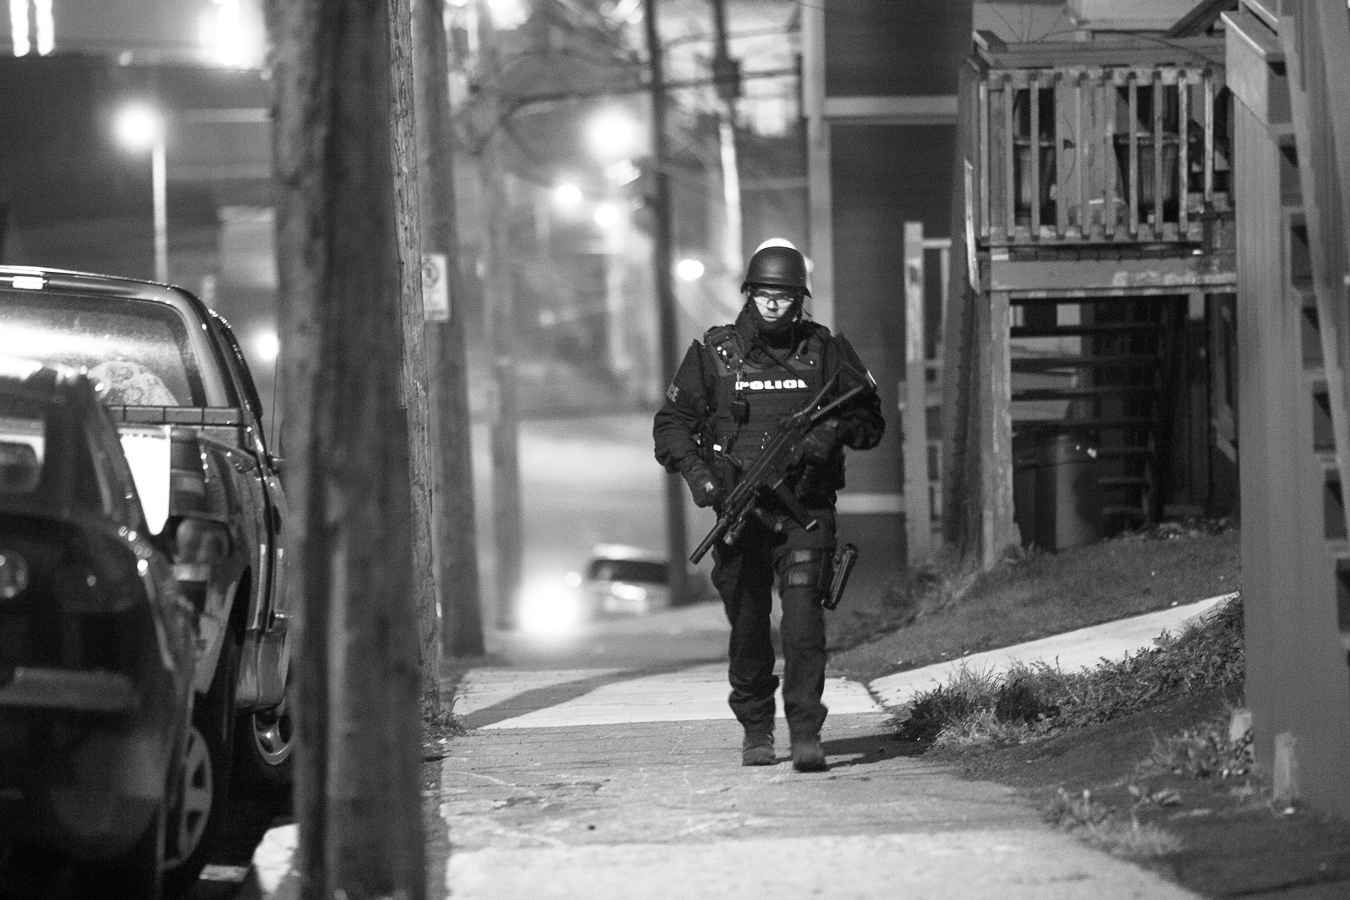 The scene of an armed standoff in the early morning hours of May12, 2013 - Springdale Street